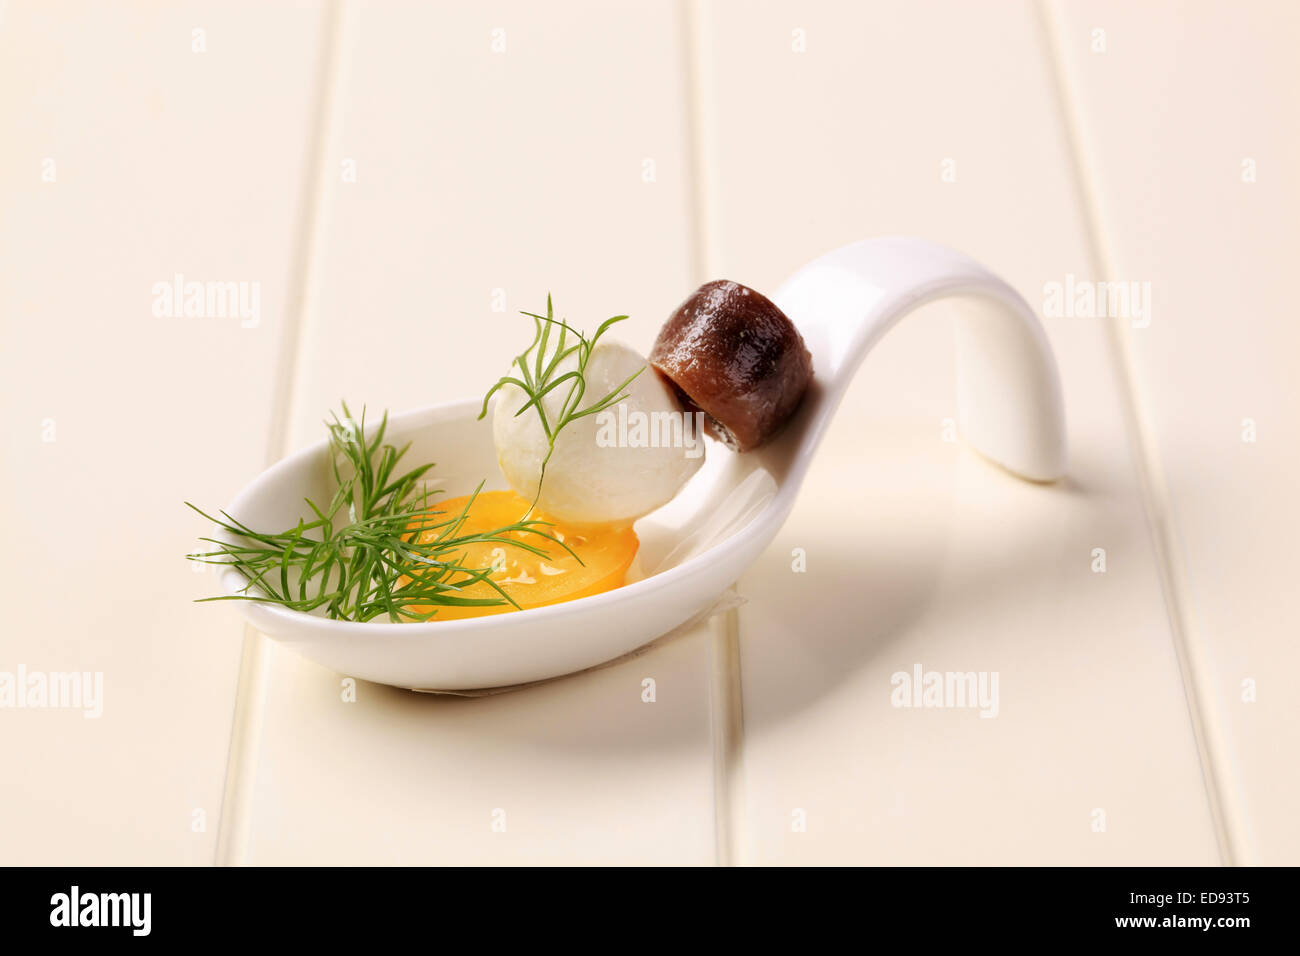 Mozzarella cheese ball and rolled anchovy fillet Stock Photo